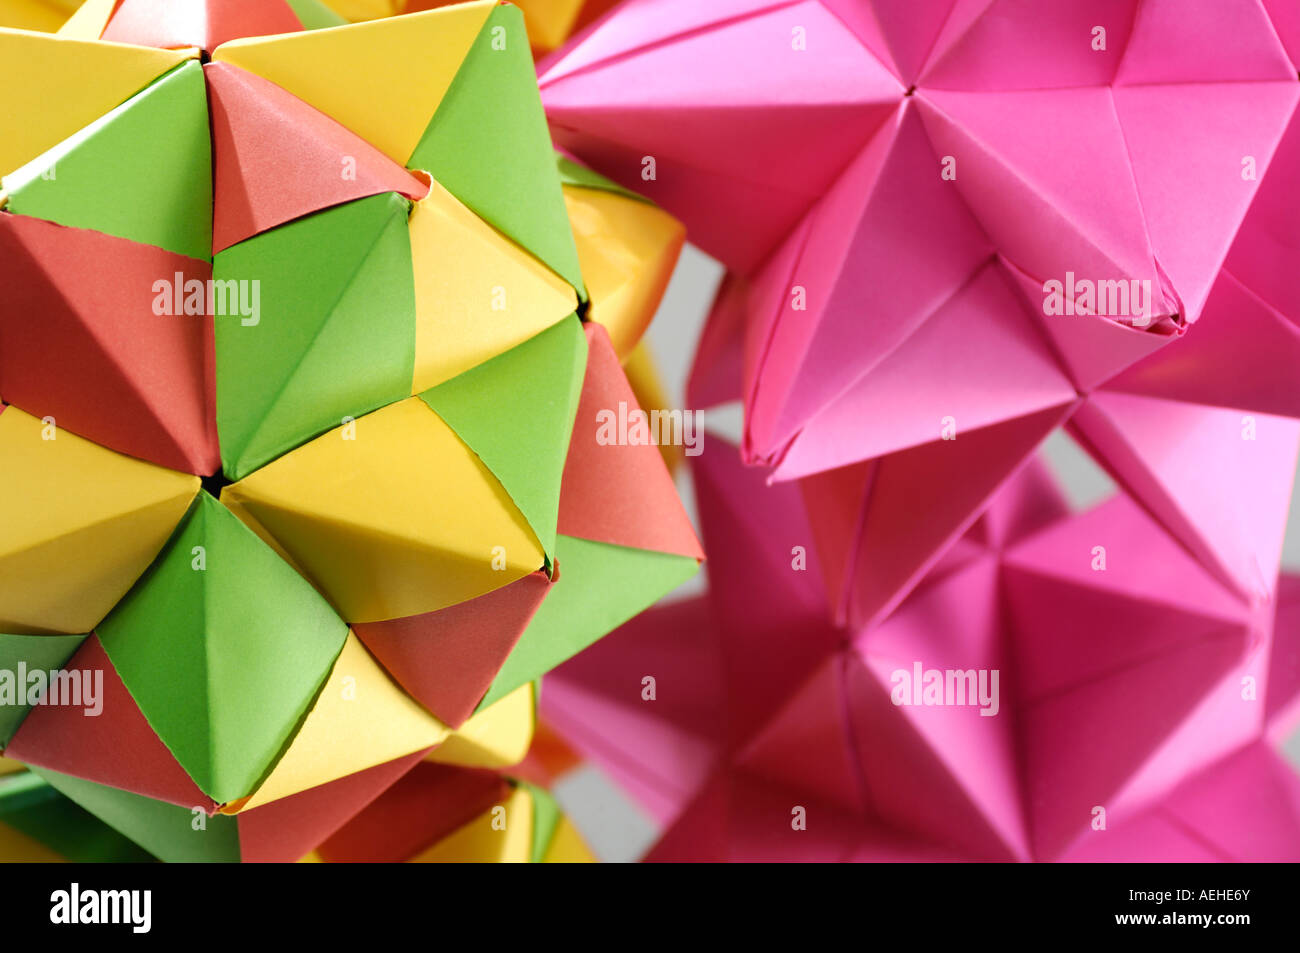 Colorful bright Origami abstract figures polyhedrons Stock Photo